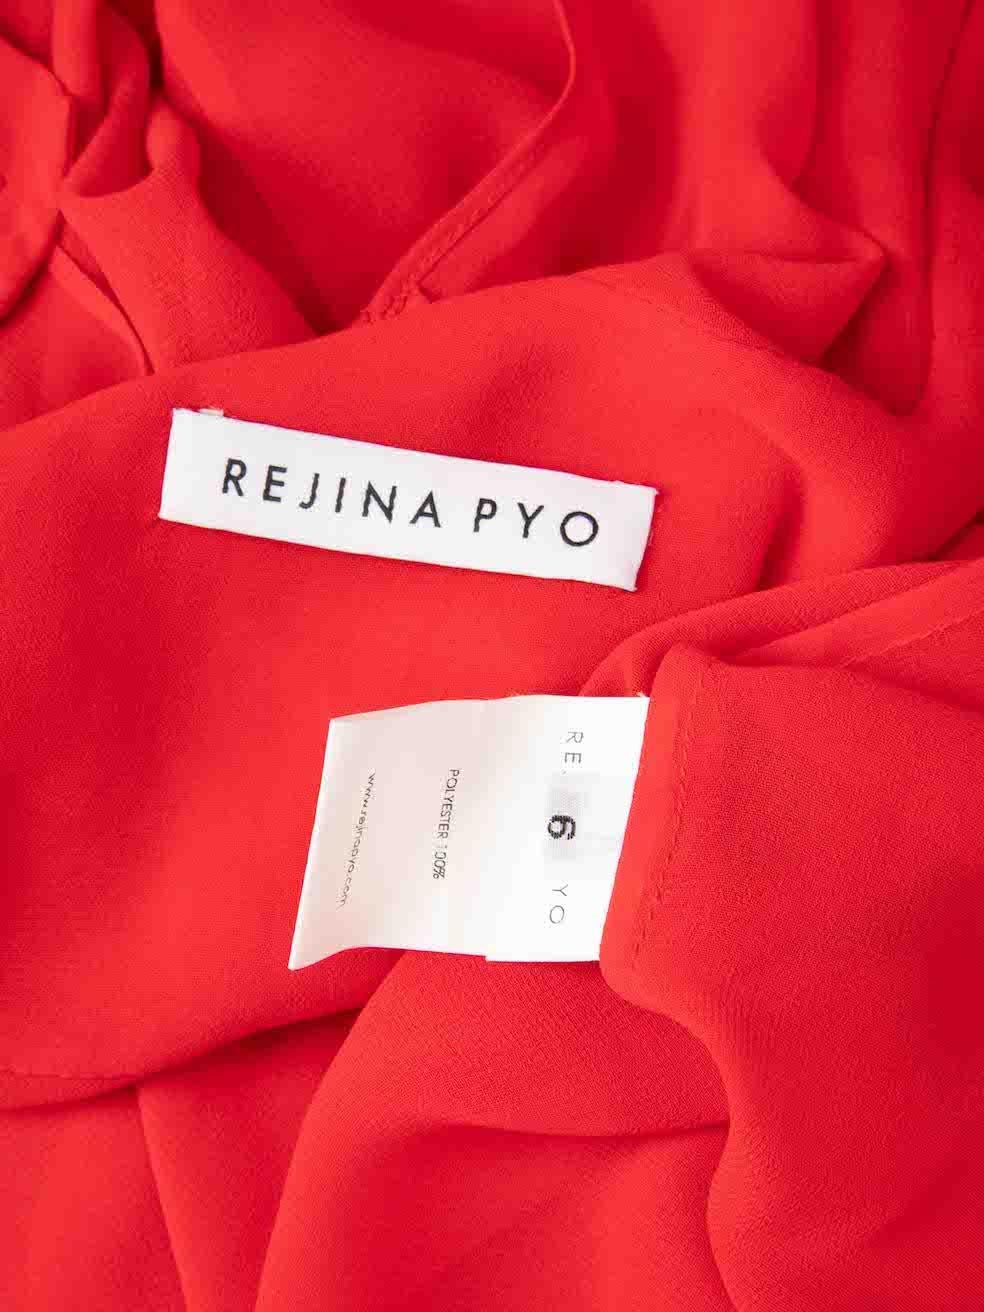 Rejina Pyo Red Sheer Front-Tie Shirt Size XS For Sale 1